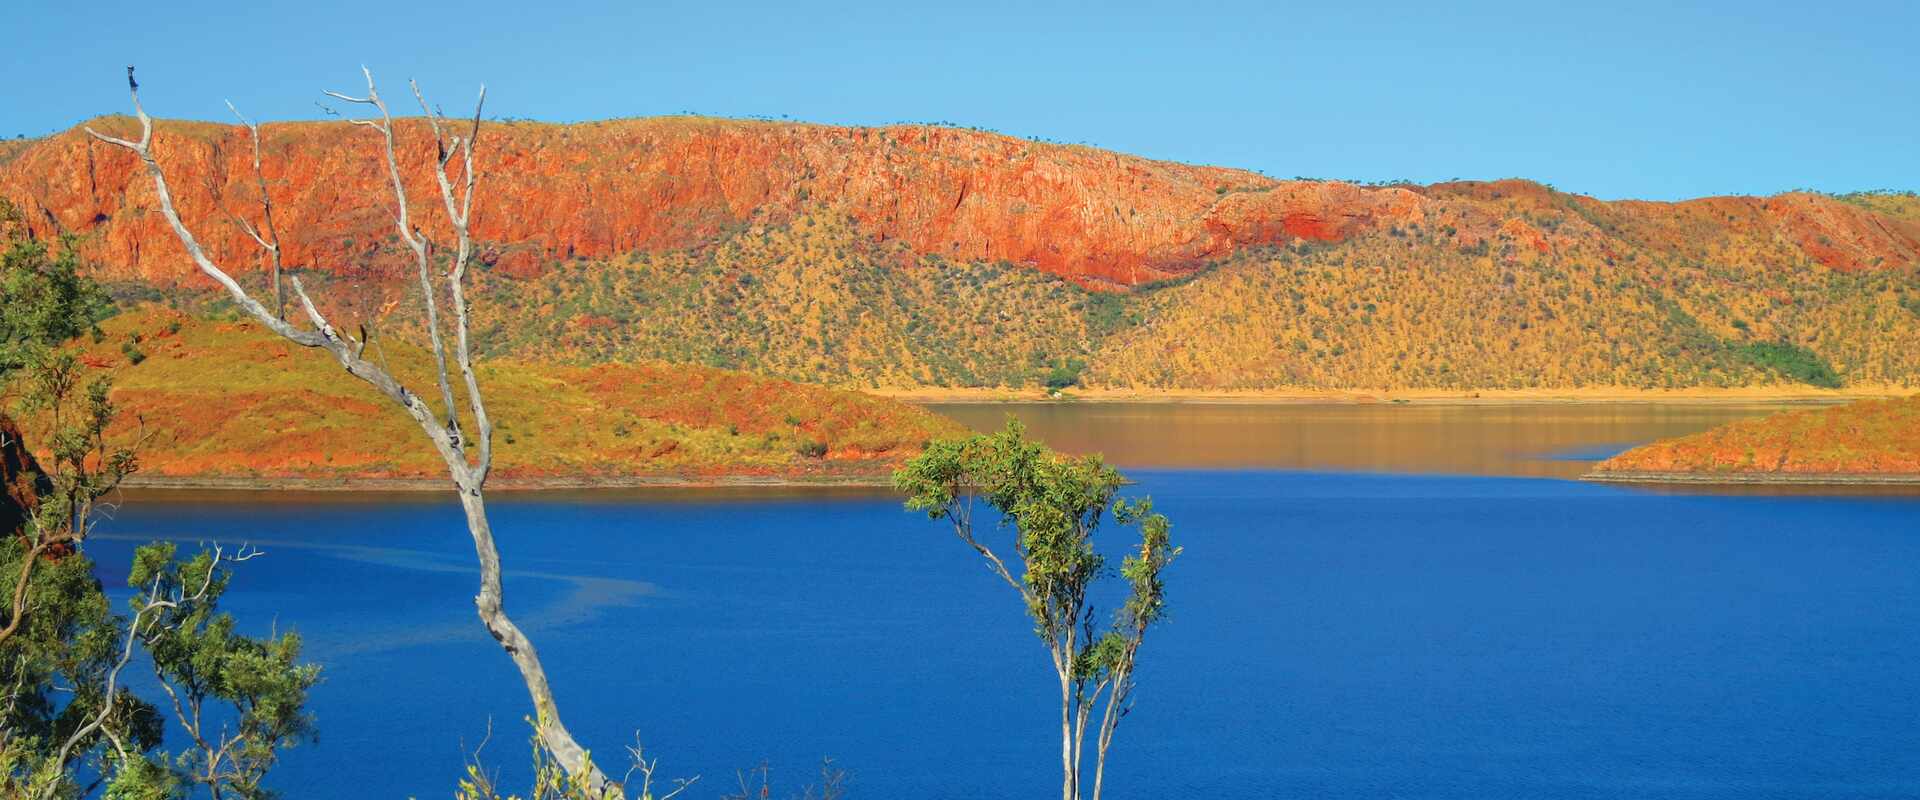 View of blue lake infront of red and green landscape, Western Australia